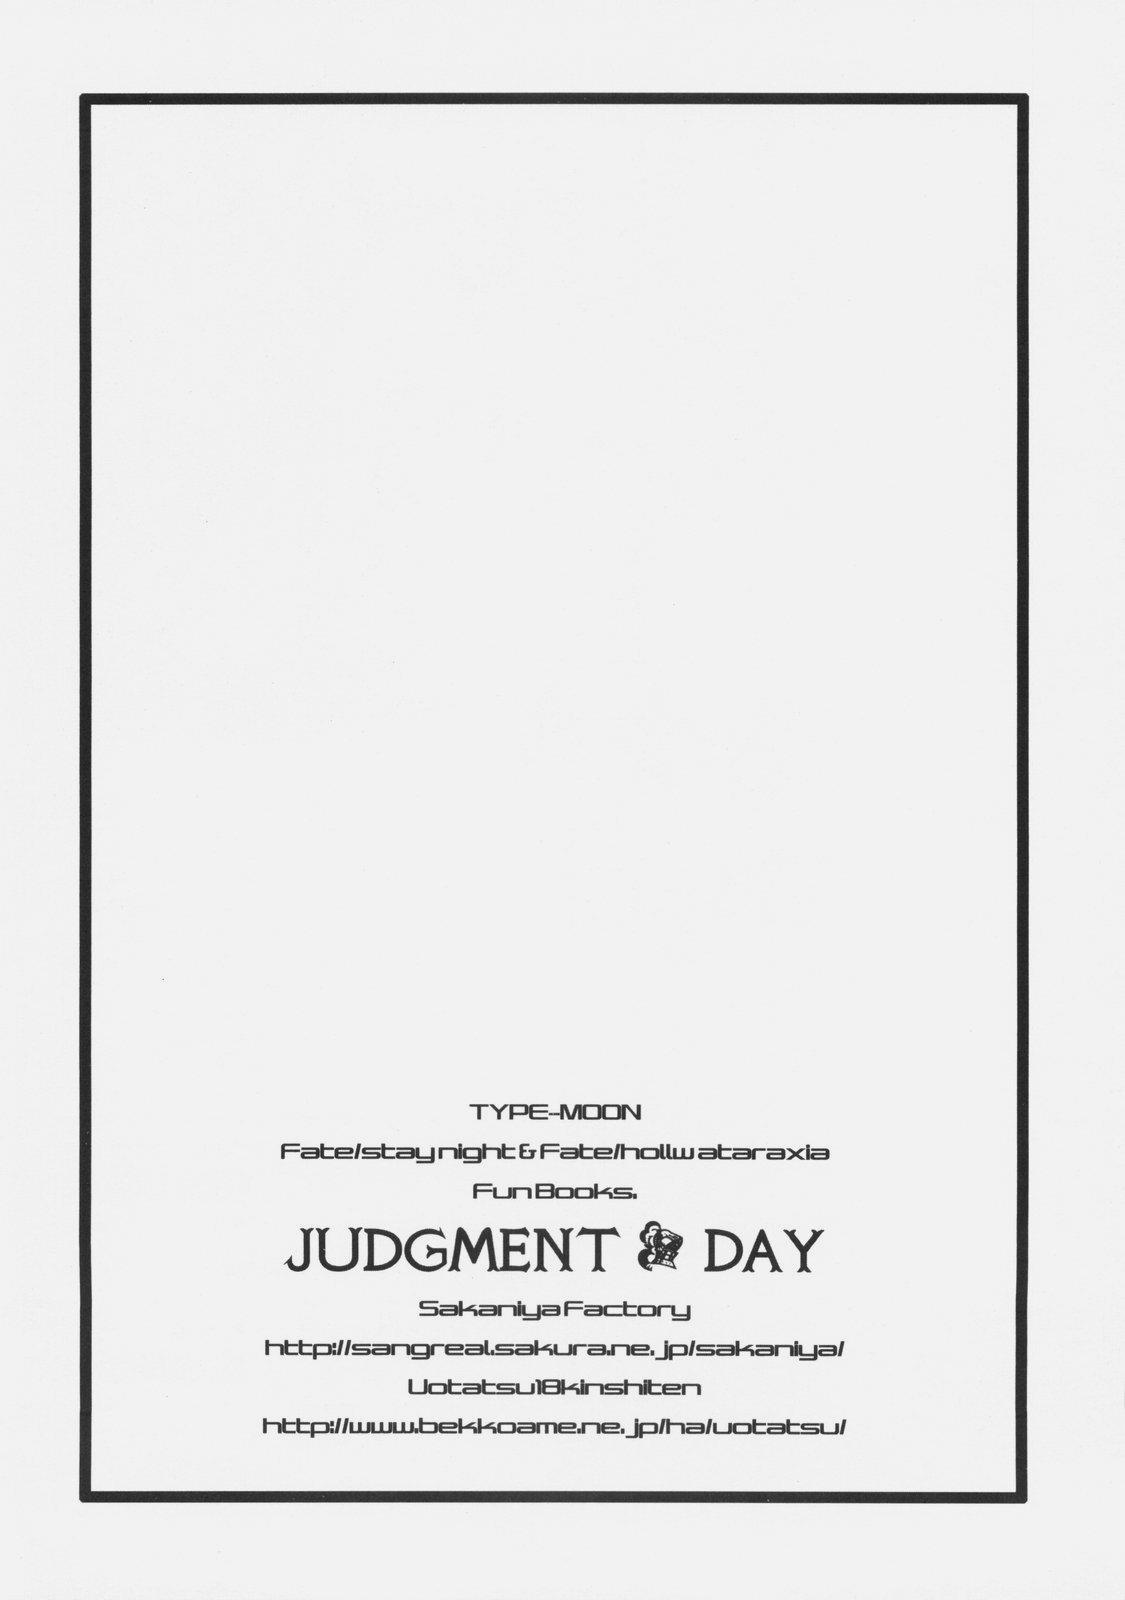 JUDGMENT DAY 54